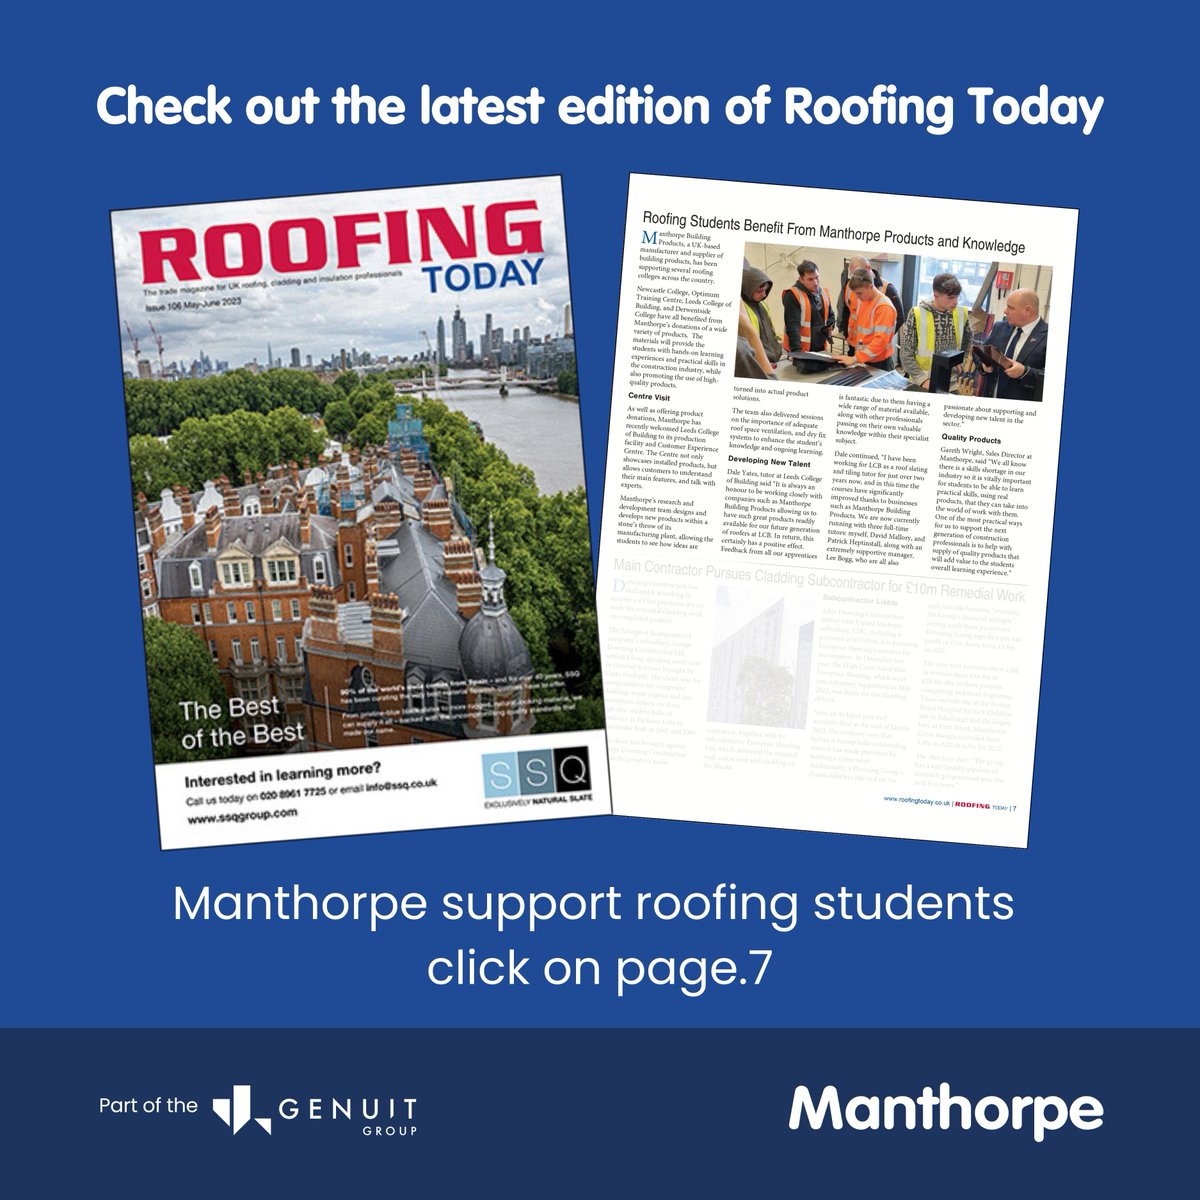 Out Now - check out the latest edition of @RoofingToday - @ManthorpeBP are so pleased to have a feature on the recent collaboration with @WeAre_LCB 
ow.ly/Wmwc50OvxoV

#roofingtoday #colleges #press #collegesupport #supportingstudents